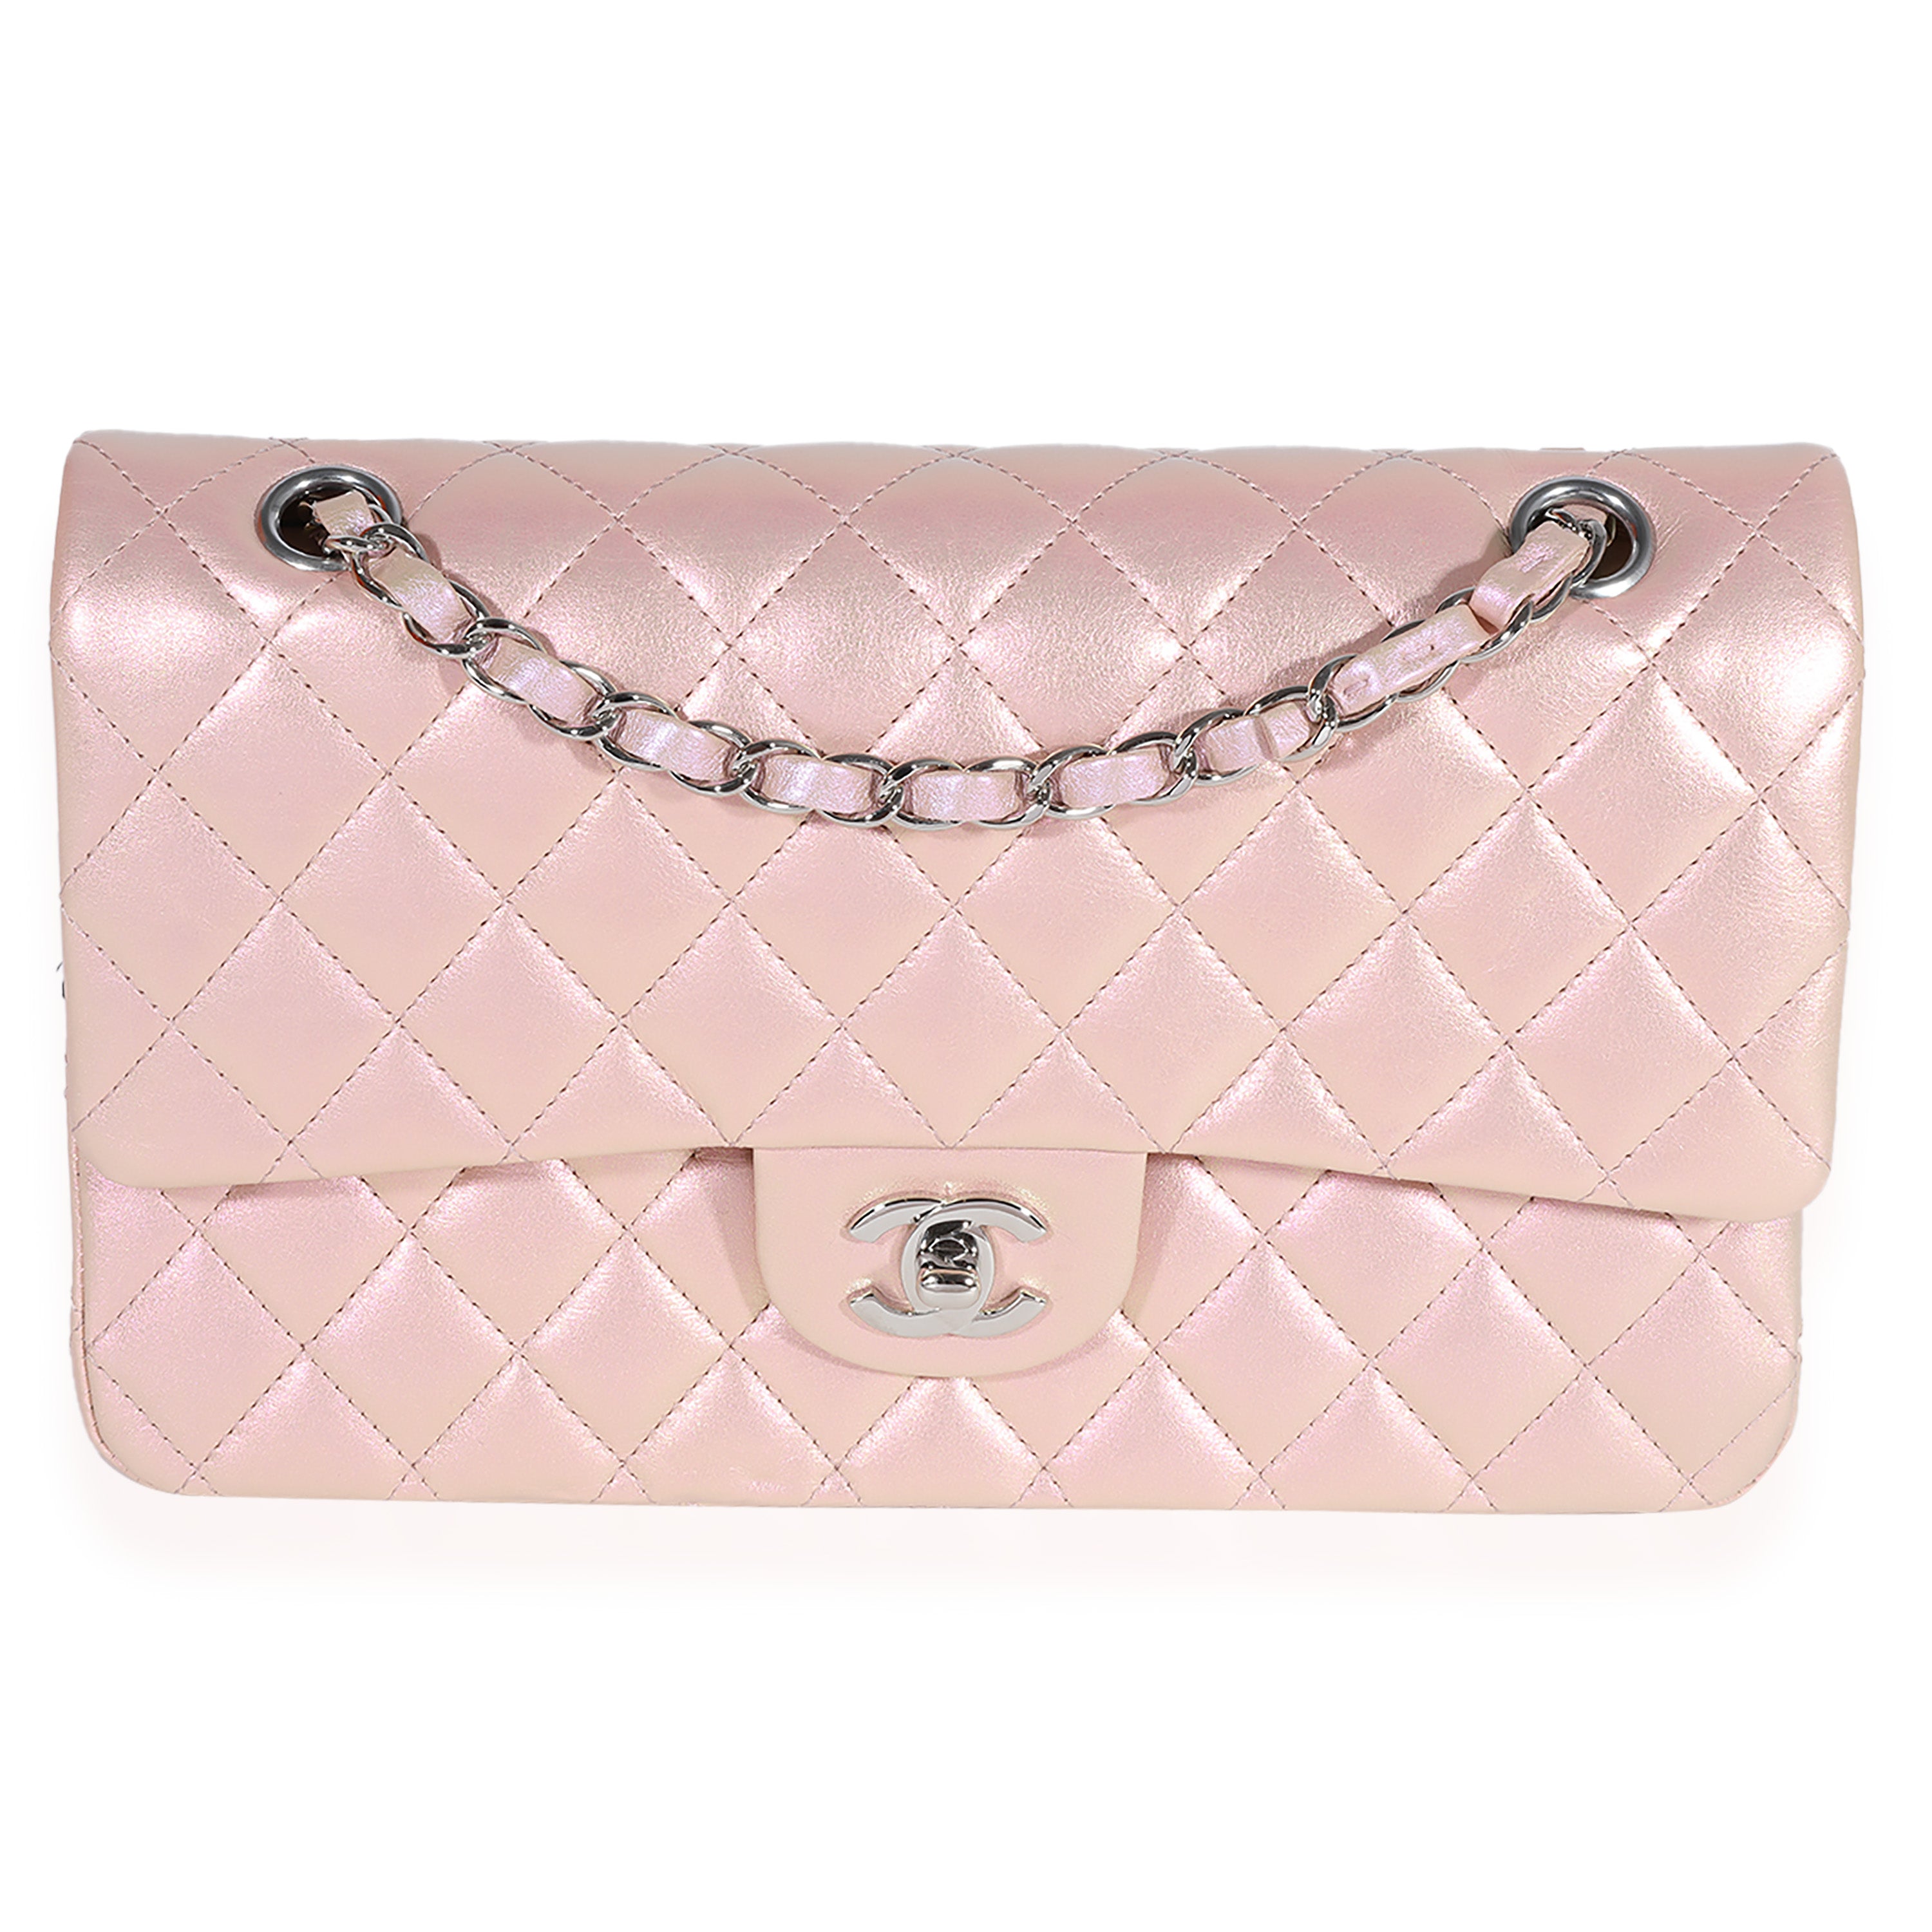 Chanel Pink Iridescent Quilted Lambskin Medium Classic Double Flap Bag - Handbag | Pre-owned & Certified | used Second Hand | Unisex